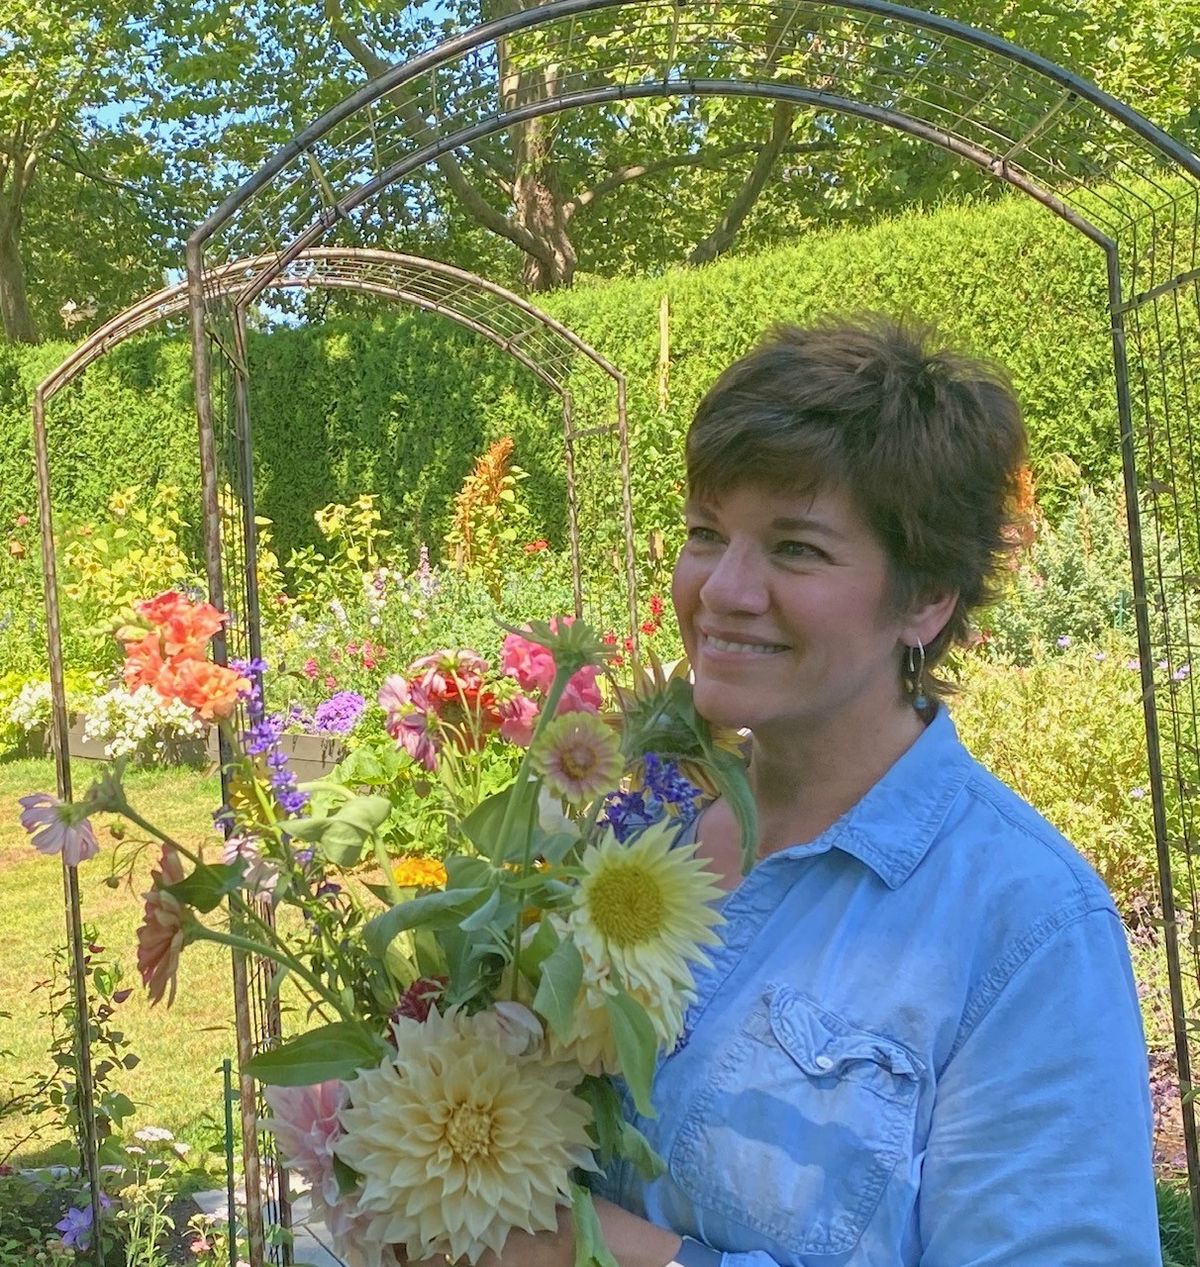 Loreen McFaul of south Spokane holds a bouquet of flowers from her garden.  (Courtesy of Loreen McFaul)